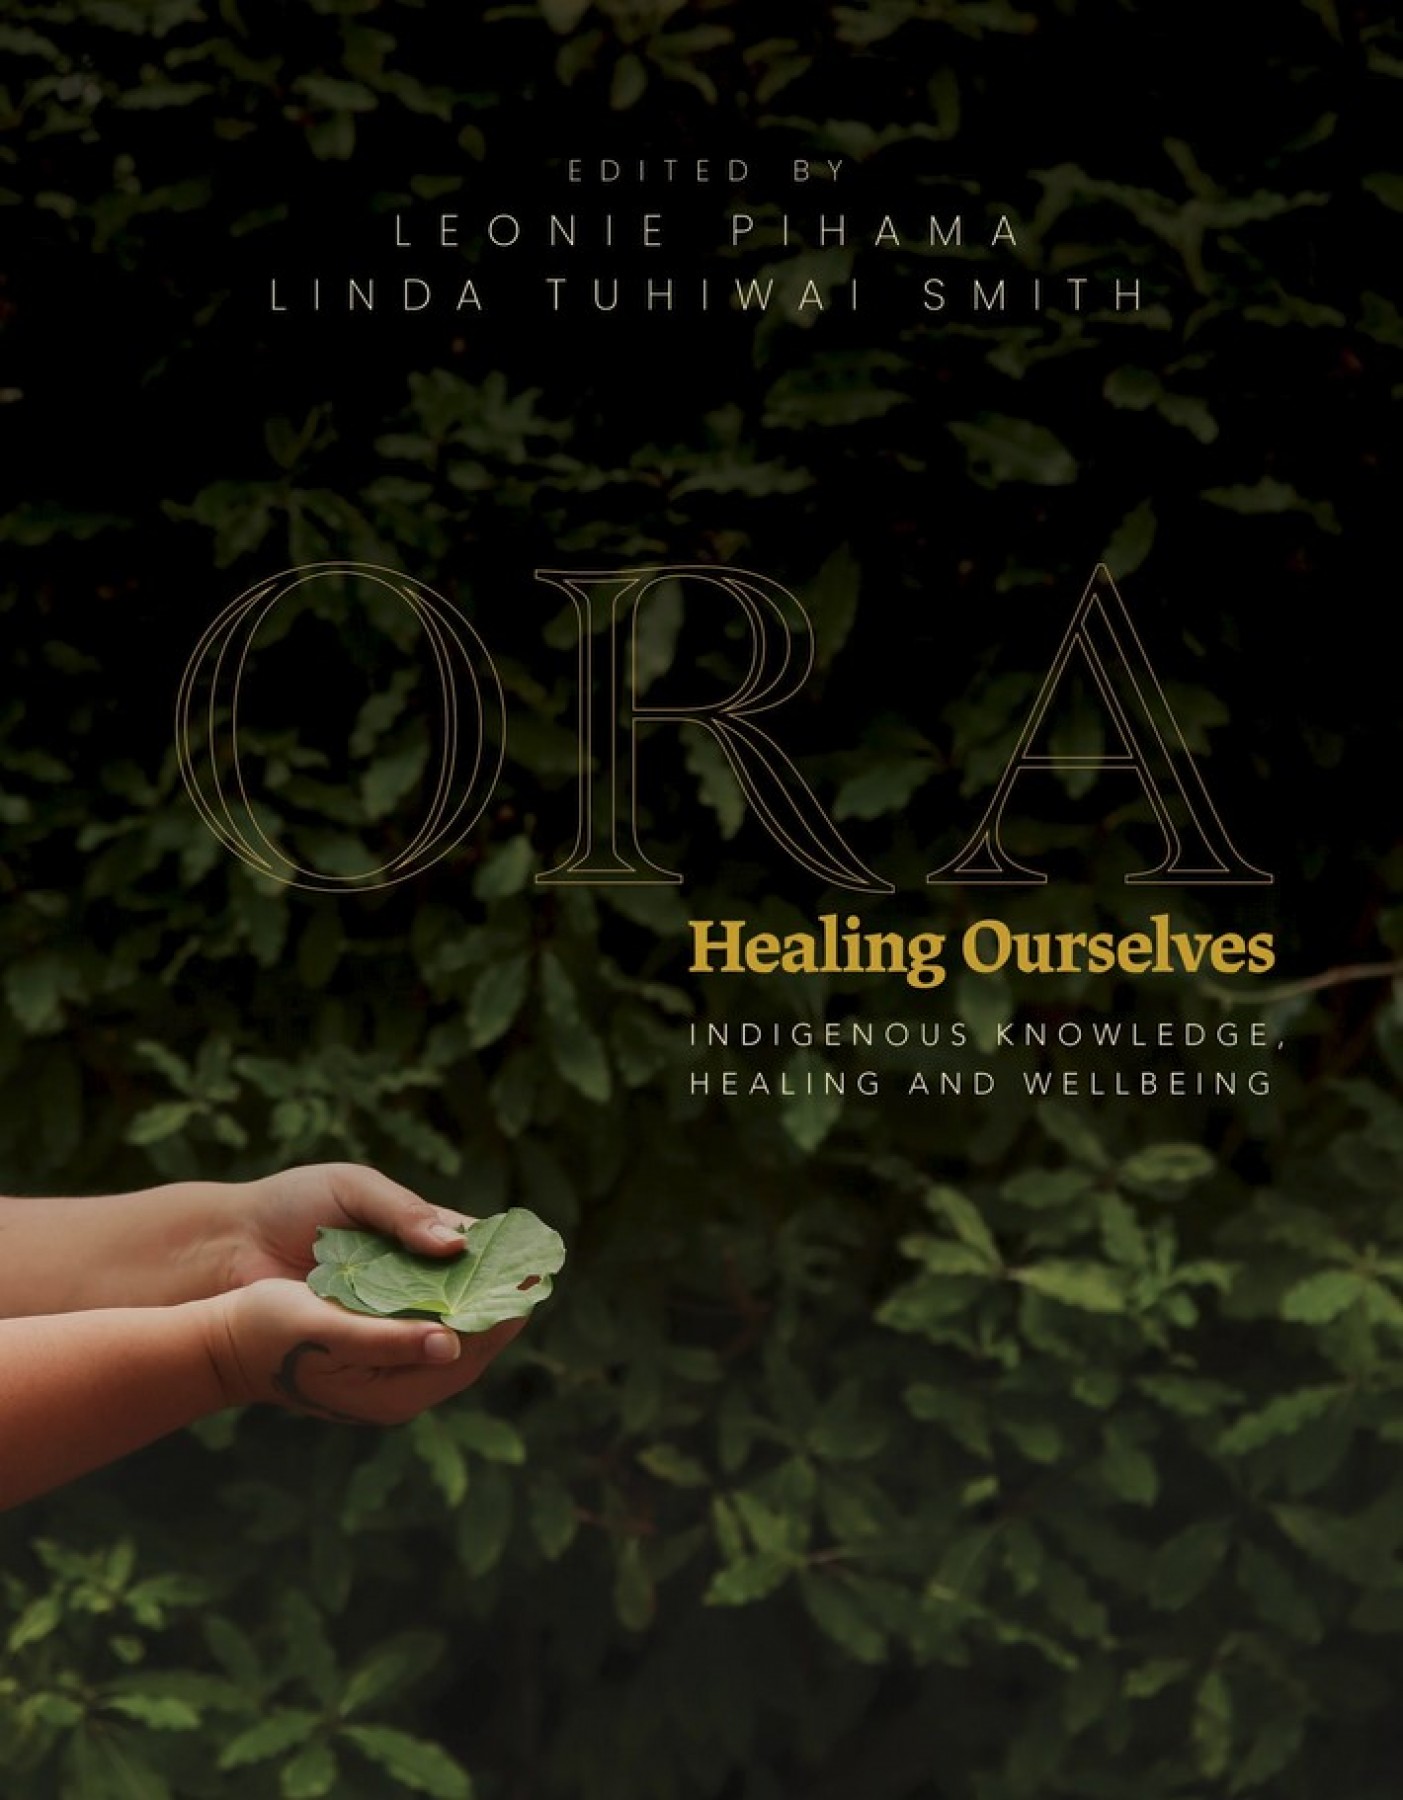 Ora: Healing ourselves - Indigenous knowledge healing and wellbeing